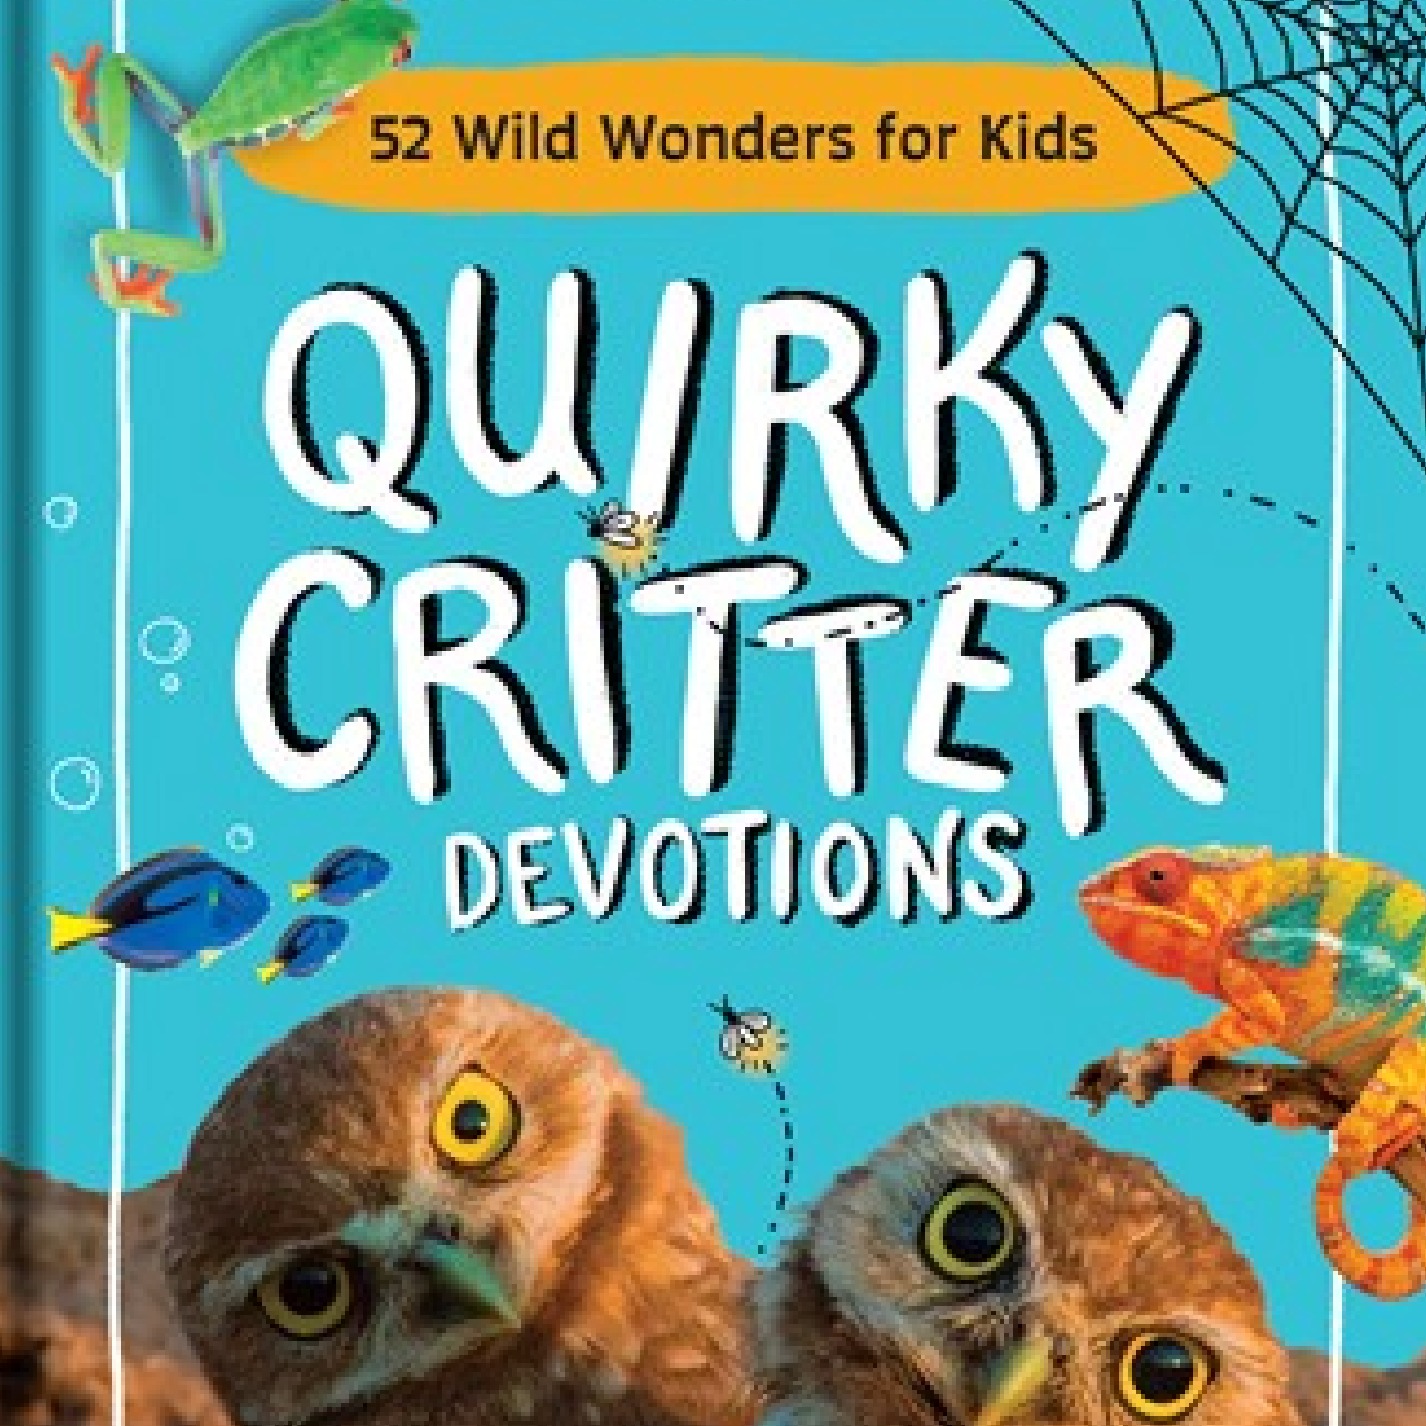 S6Ep11: Quirky Critter Devotions